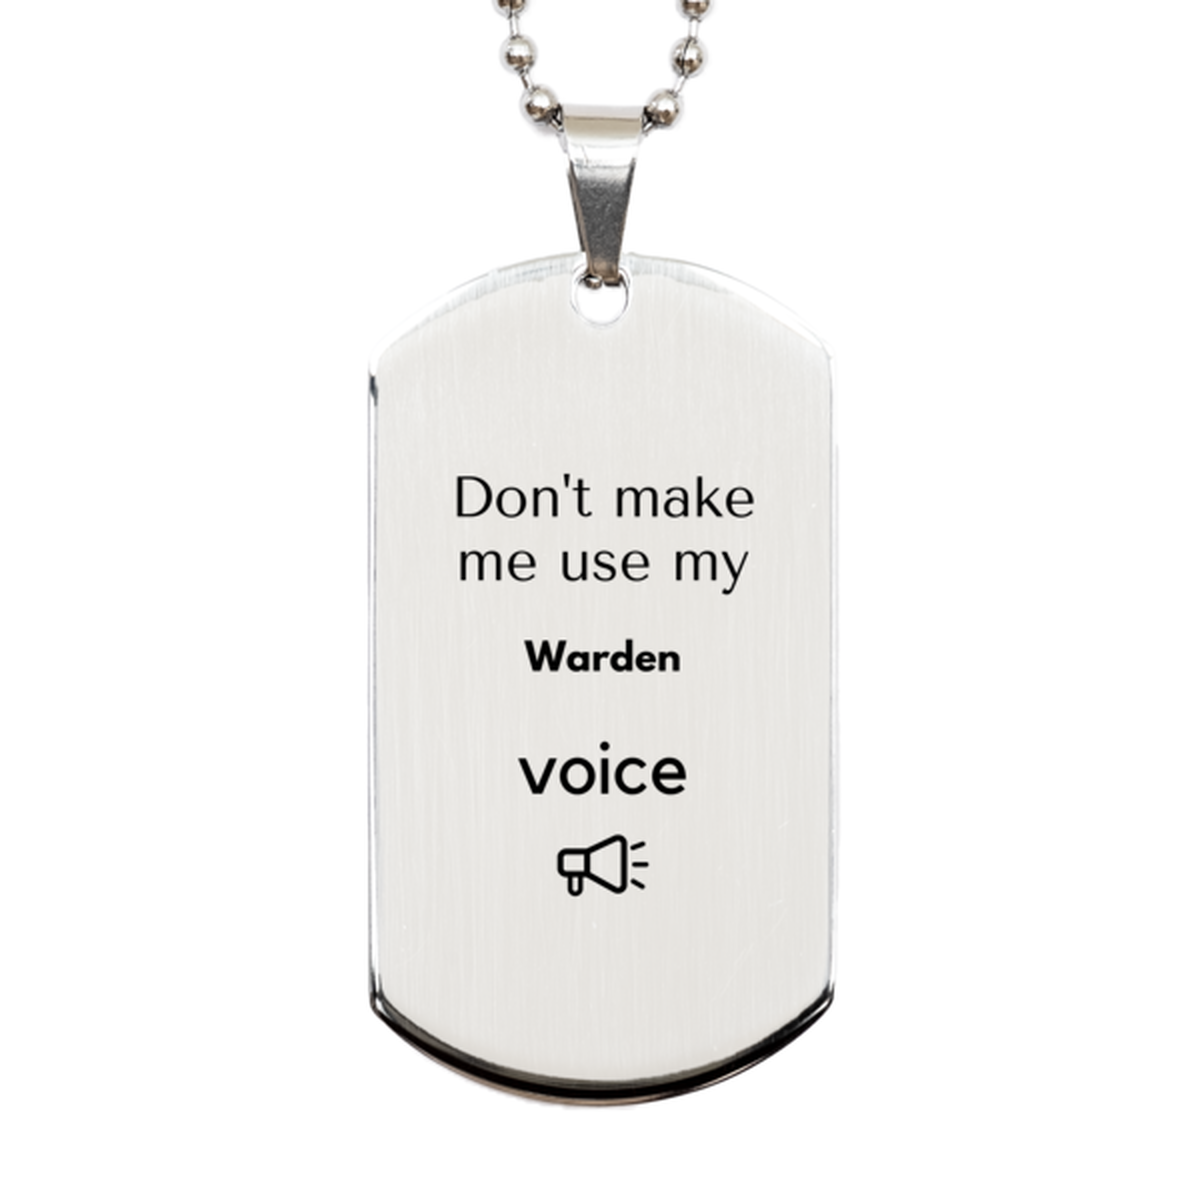 Don't make me use my Warden voice, Sarcasm Warden Gifts, Christmas Warden Silver Dog Tag Birthday Unique Gifts For Warden Coworkers, Men, Women, Colleague, Friends